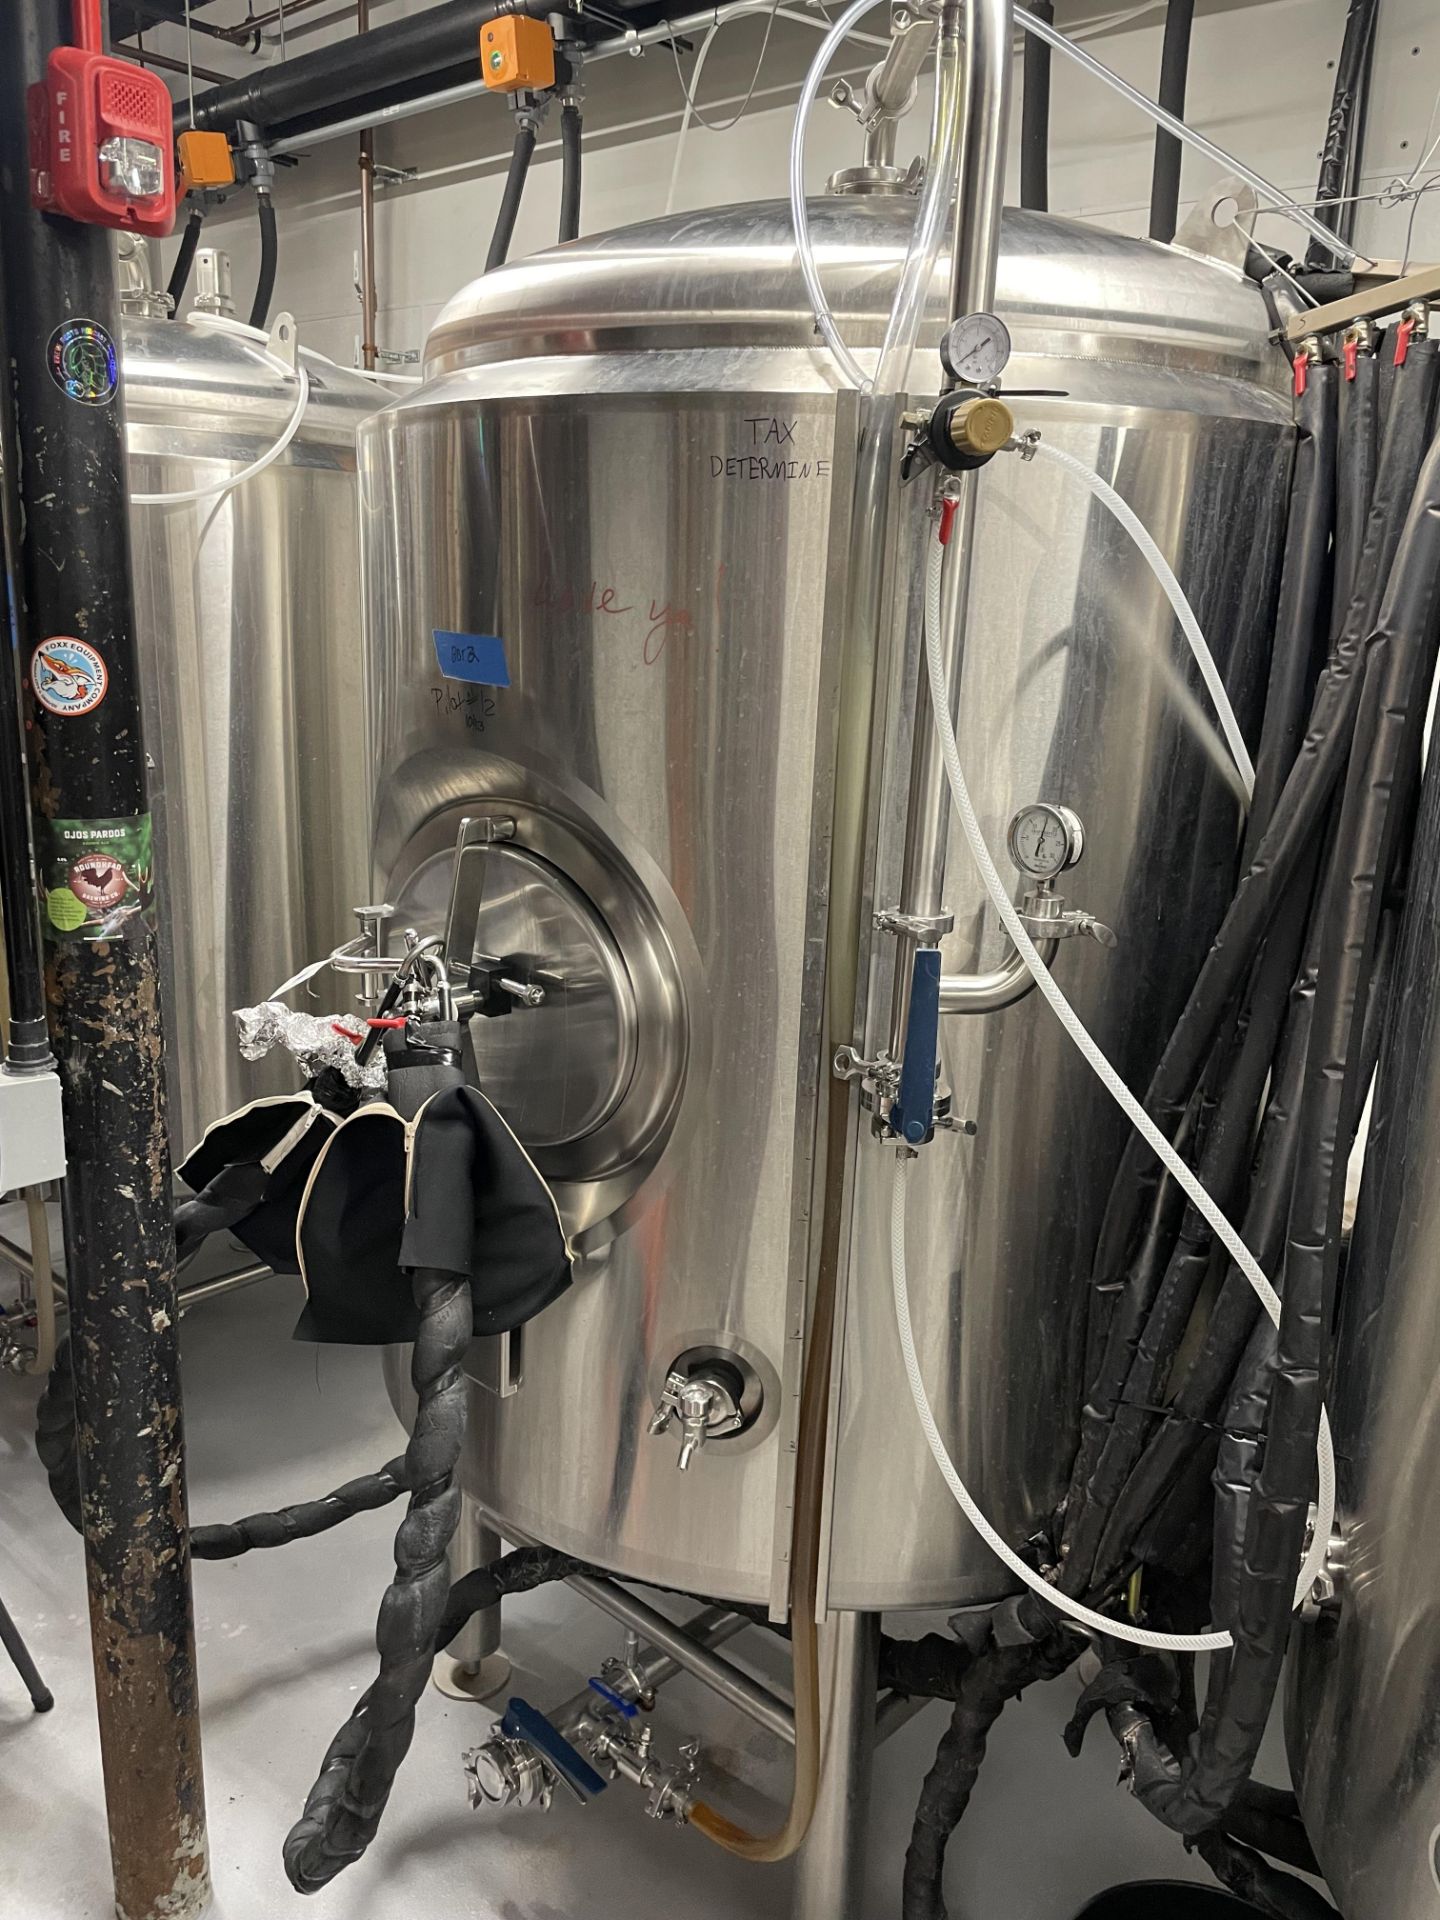 Craft Kettle 10 Bbl Jacketed Brite Tank, Sku#: BT-JI-BBL-010-STD (SEE PICTURE #2 WHICH HAS FURTHER